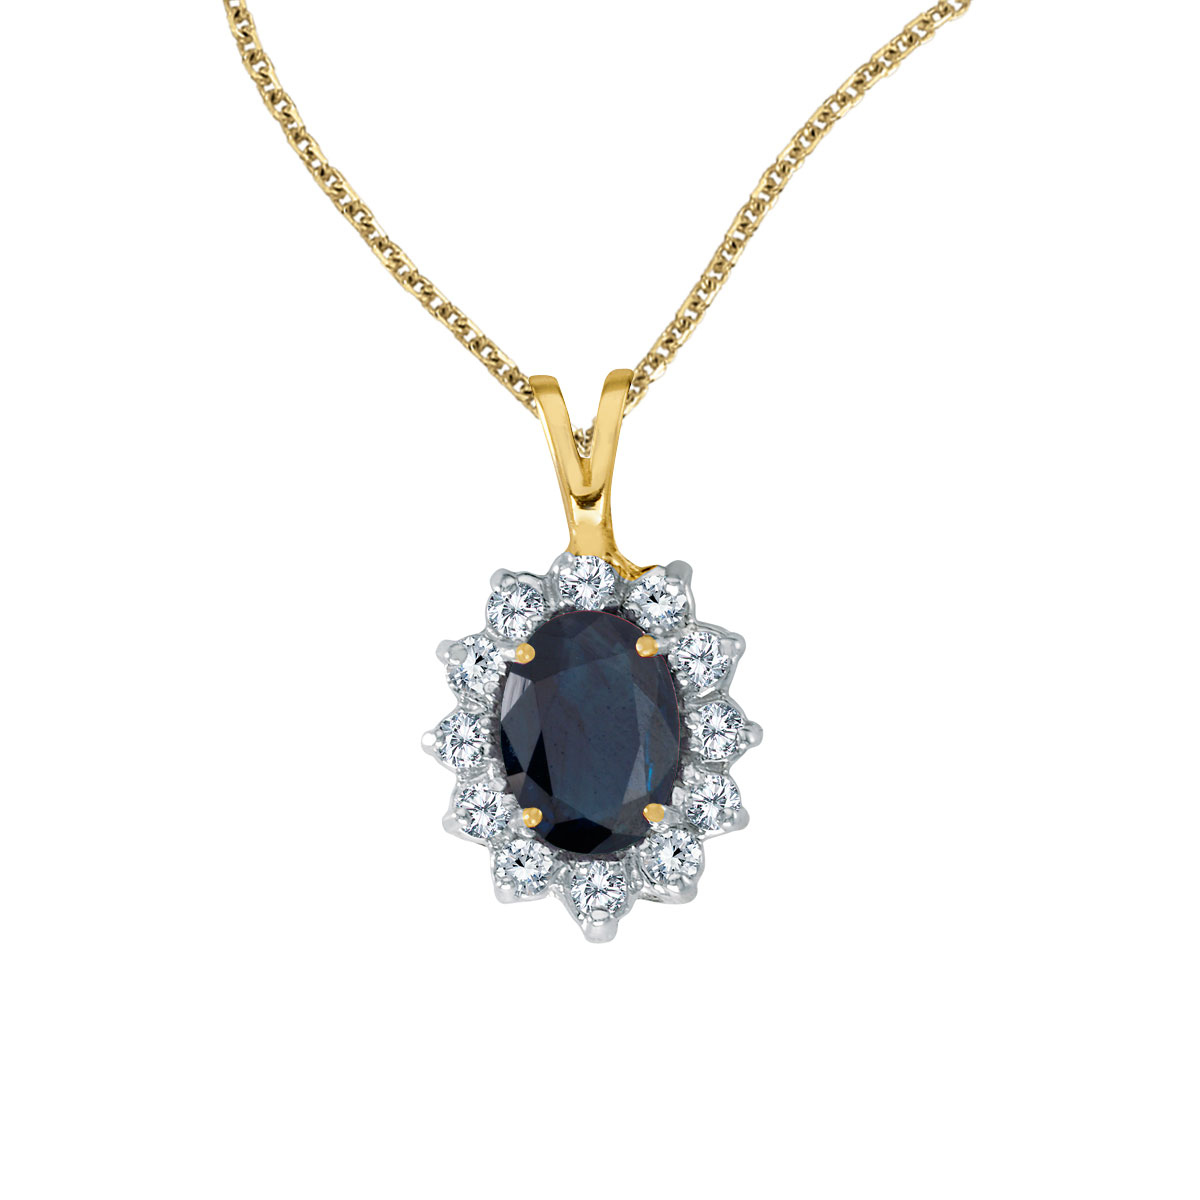 JCX2540: 8x6 mm sapphire surrounded by .30 carats of shimmering diamonds set in 14k yellow gold. Perfect for birthdays and holidays.